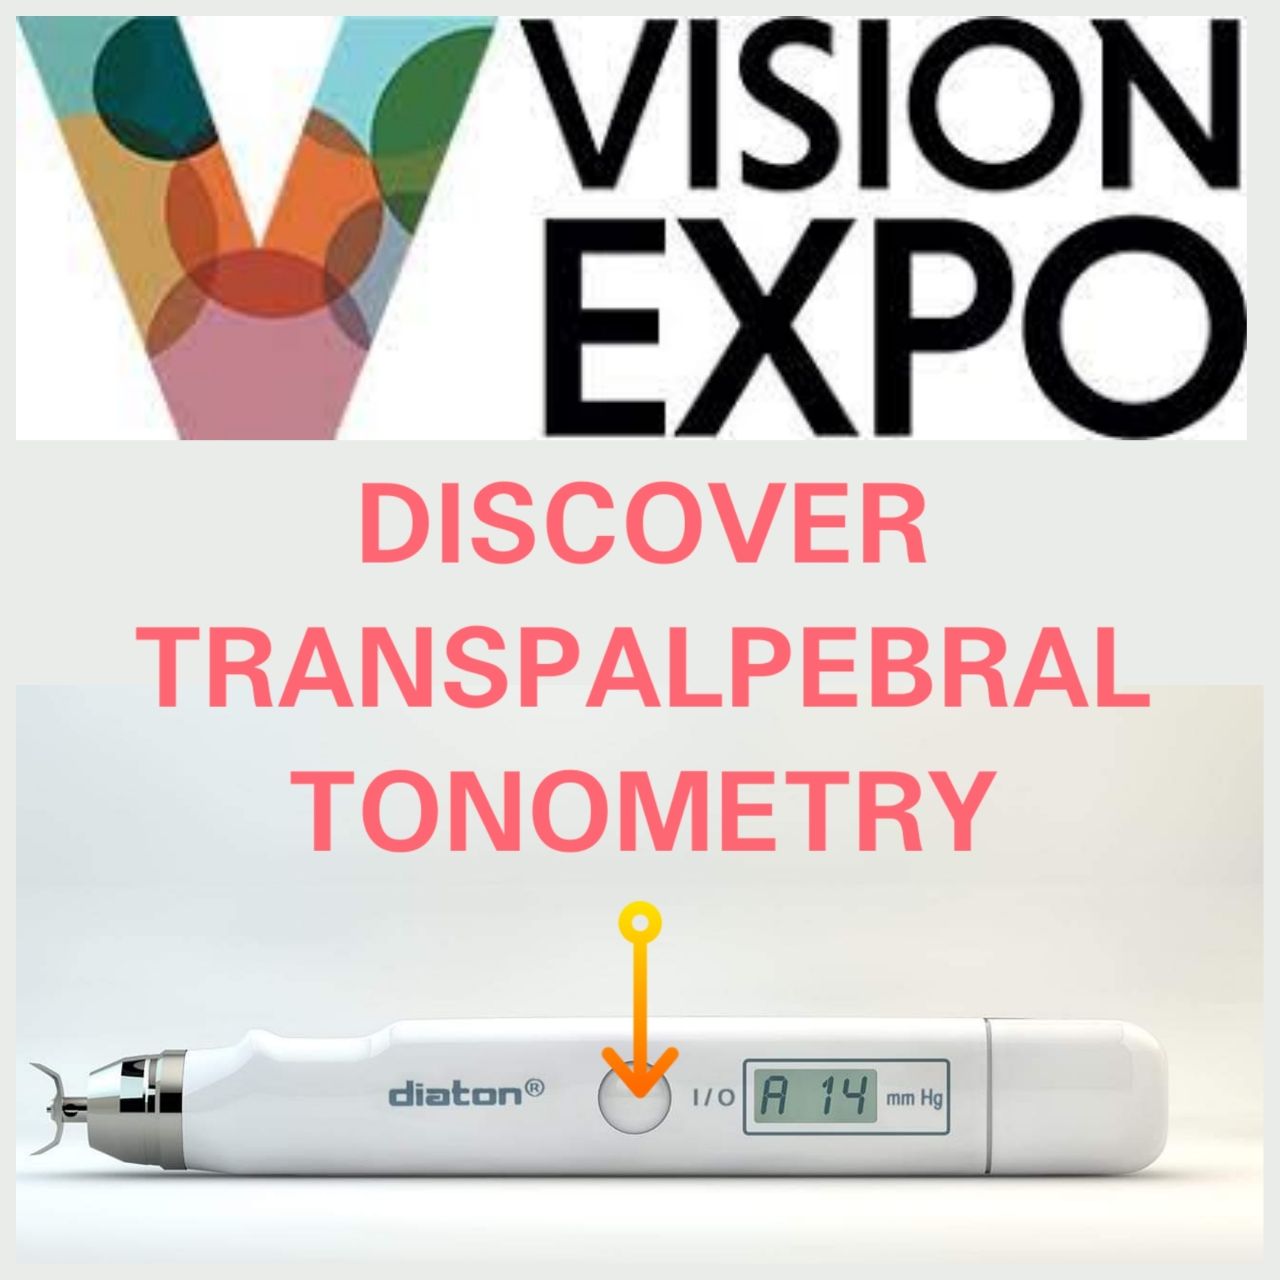 A Safer Way to Measure IOP with Diaton Tonometer Featured at Vision Expo